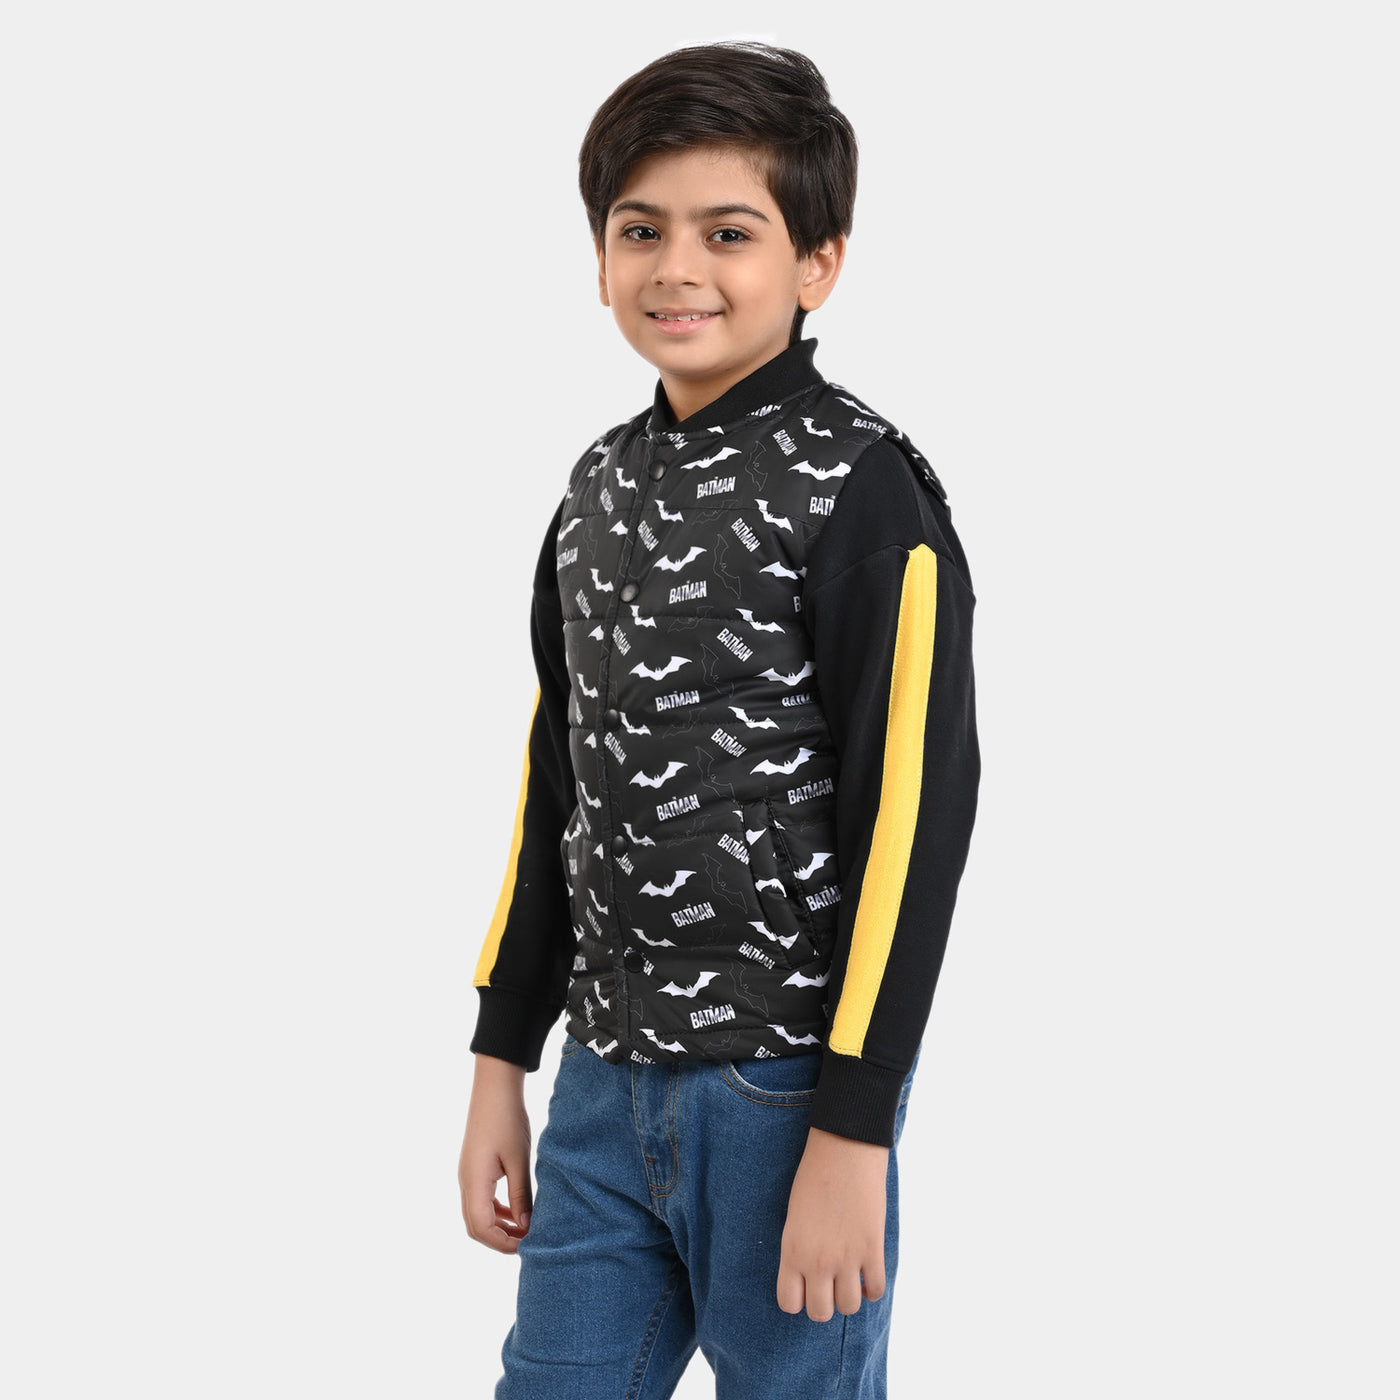 Boys taffeta Quilted Jacket Character - BLACK